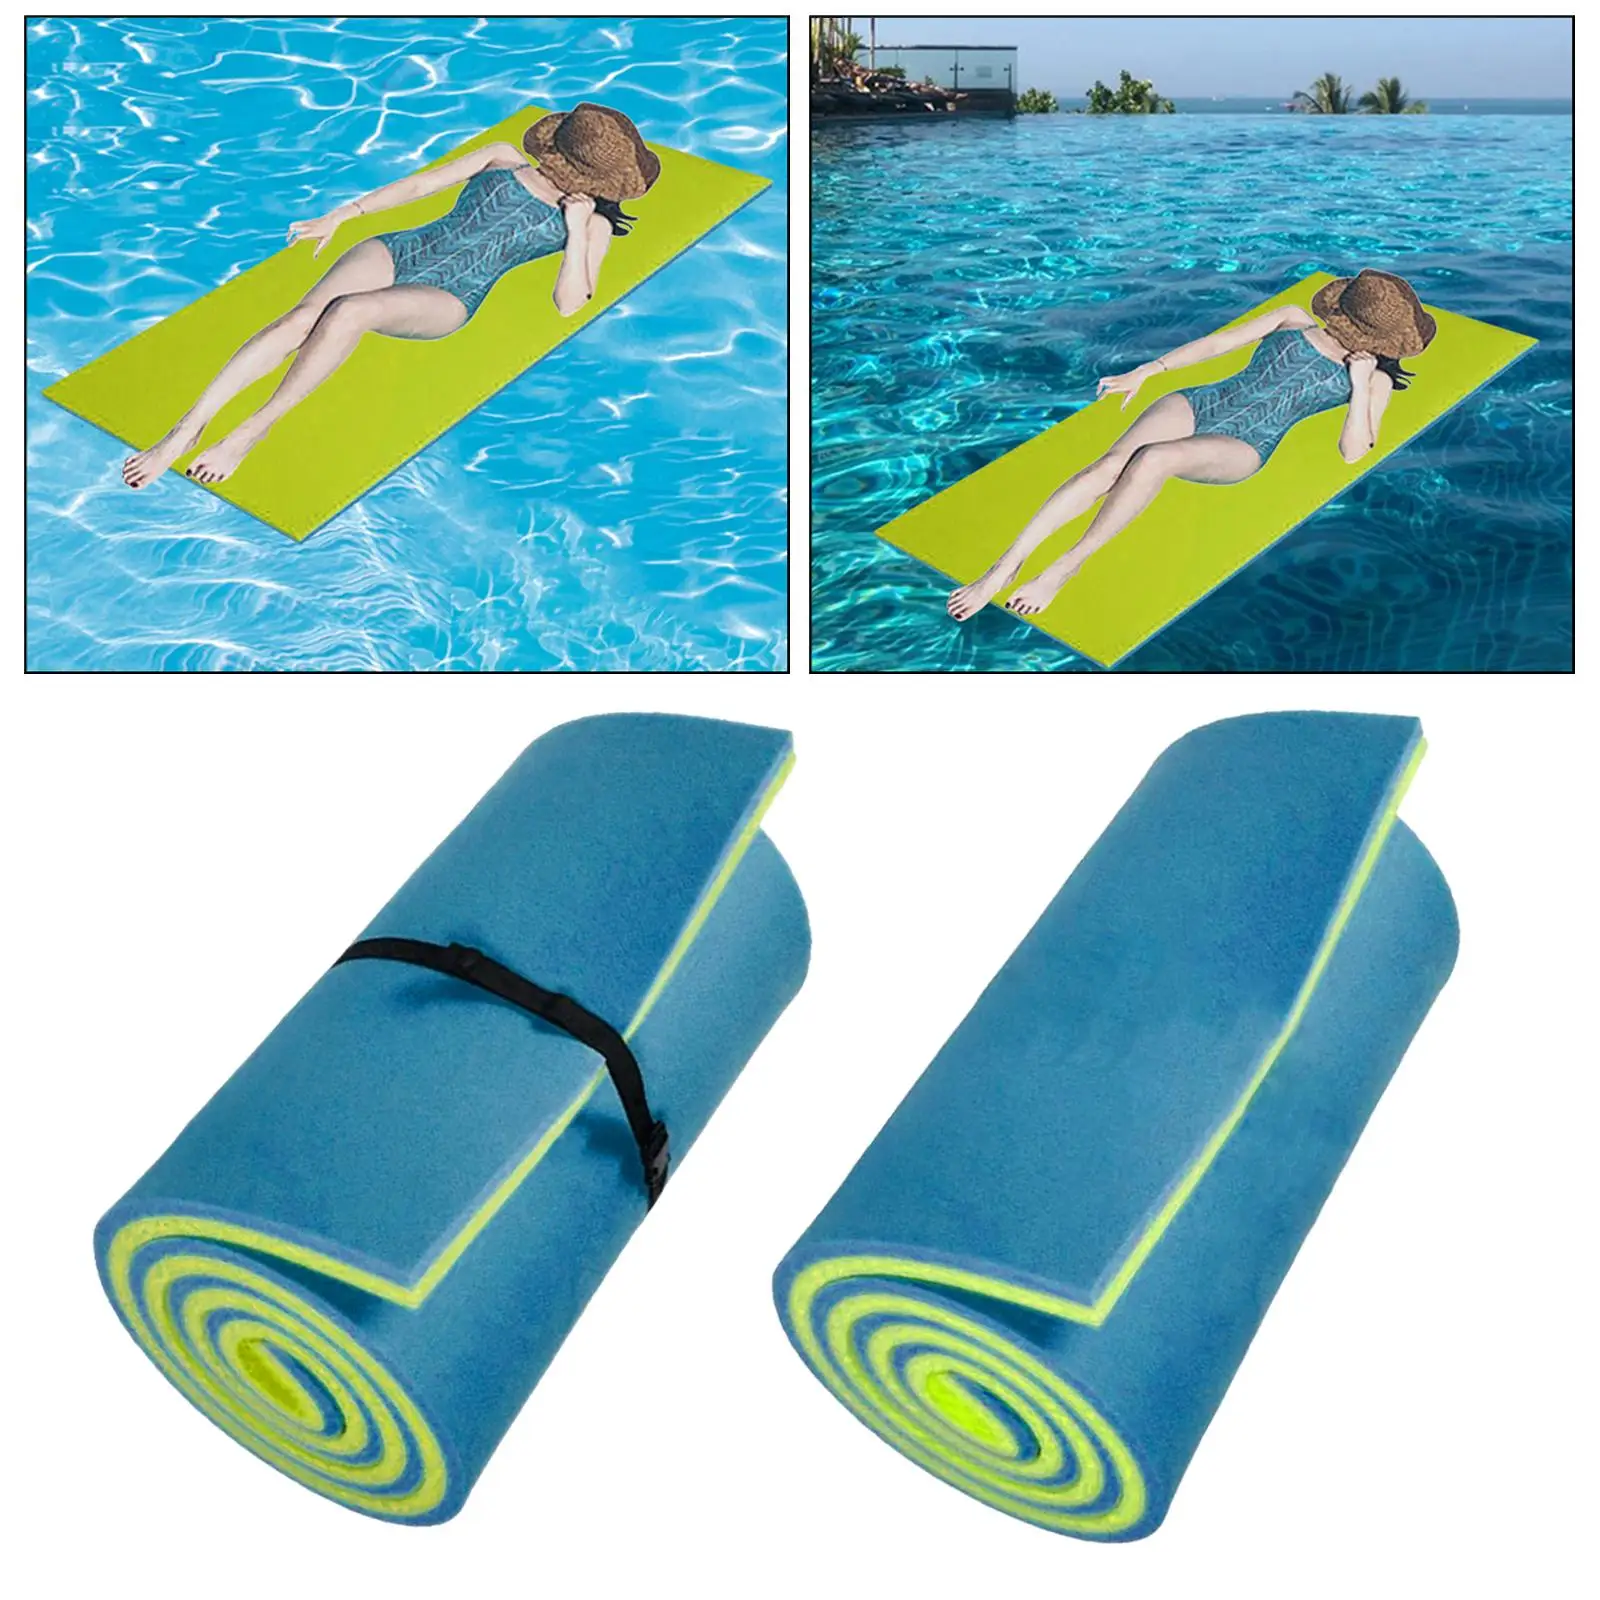 Water Float Mat Float Mat Bed Pool Float Raft for Boating Family Fun Party